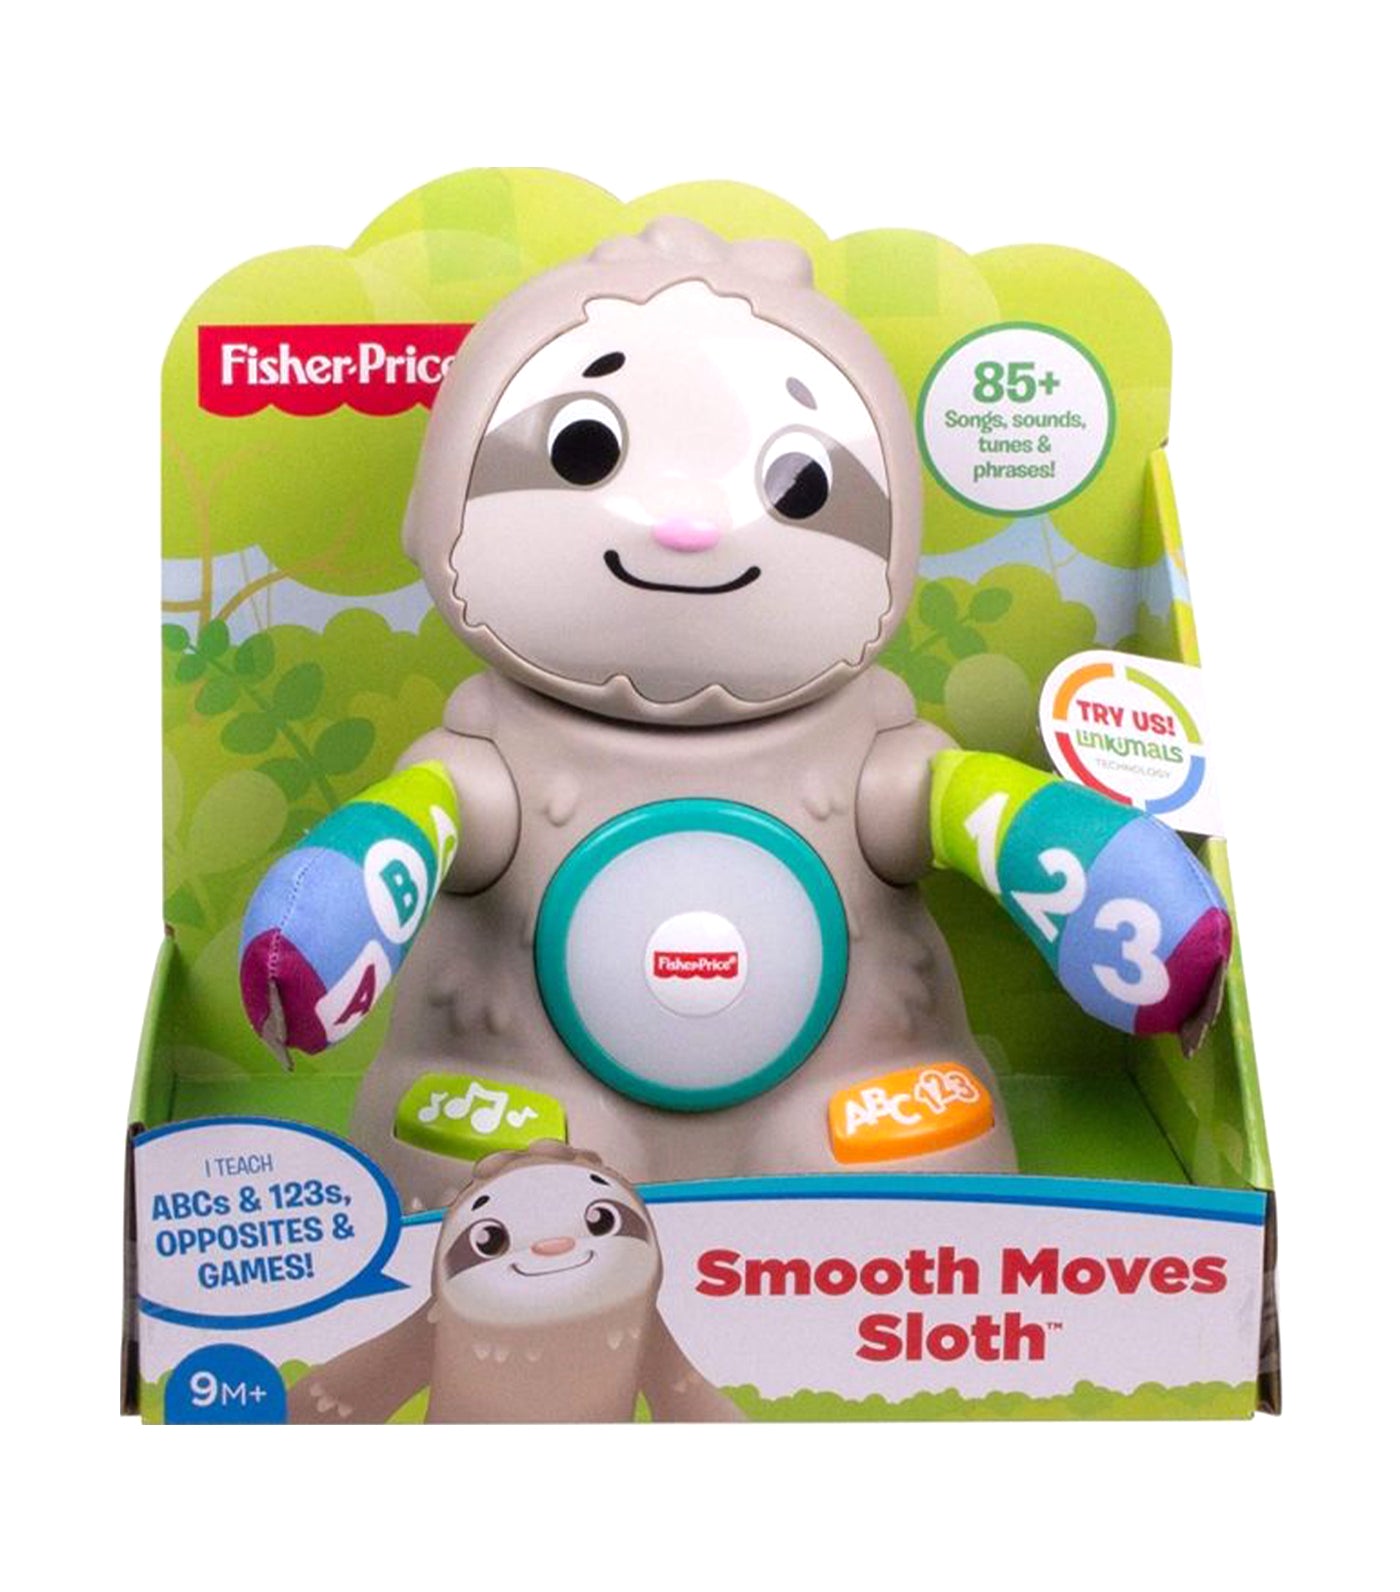 fisher-price linkimals smooth moves sloth